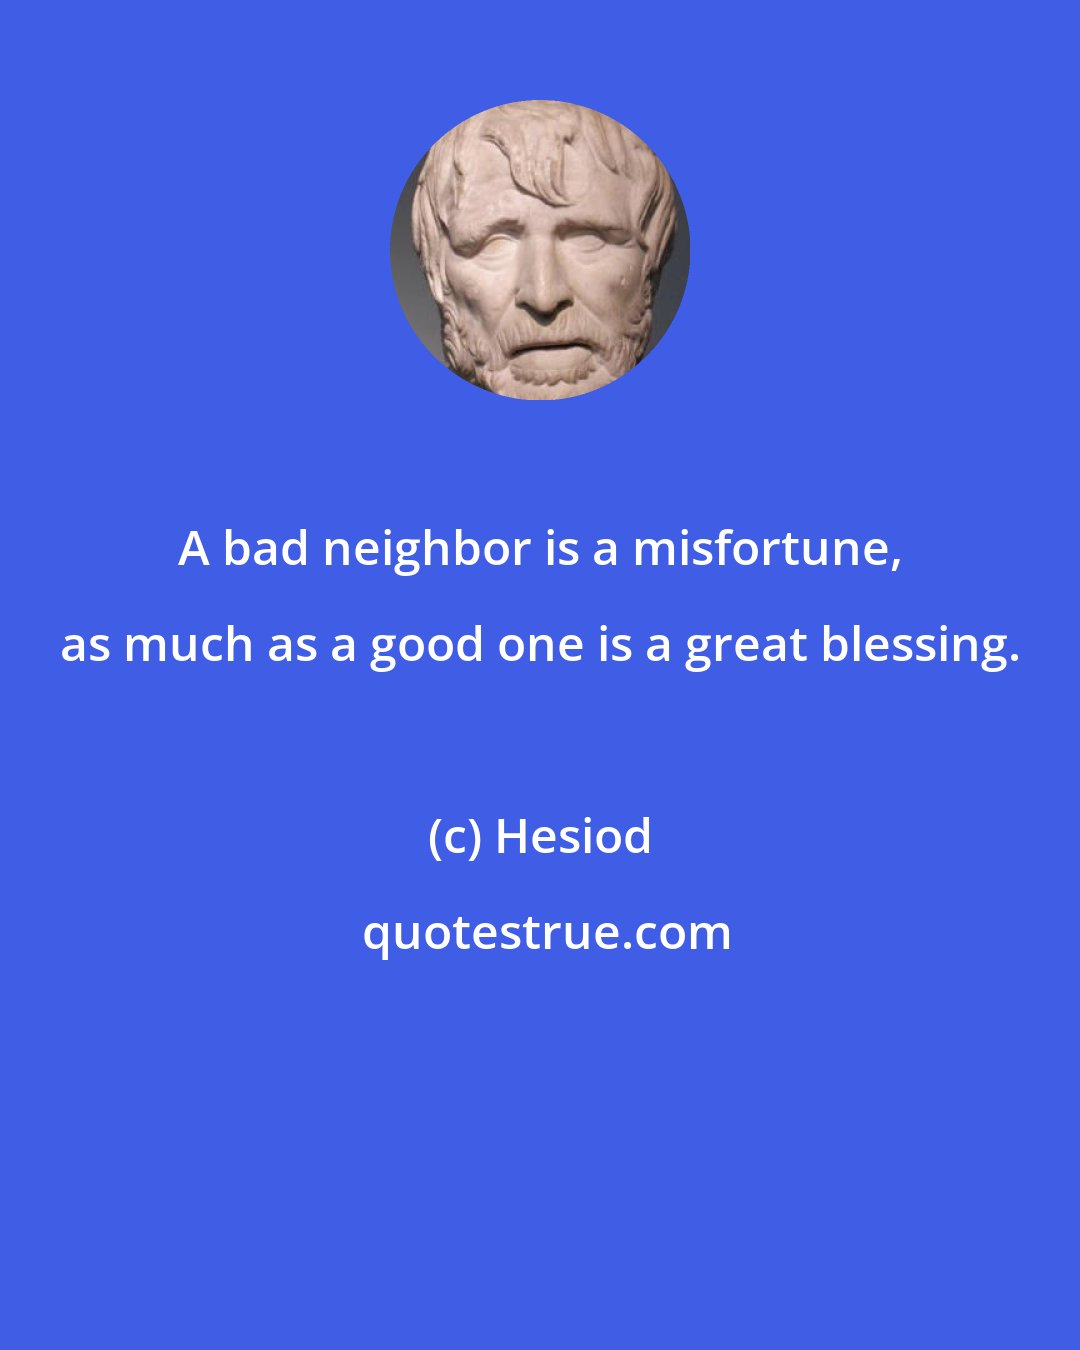 Hesiod: A bad neighbor is a misfortune, as much as a good one is a great blessing.